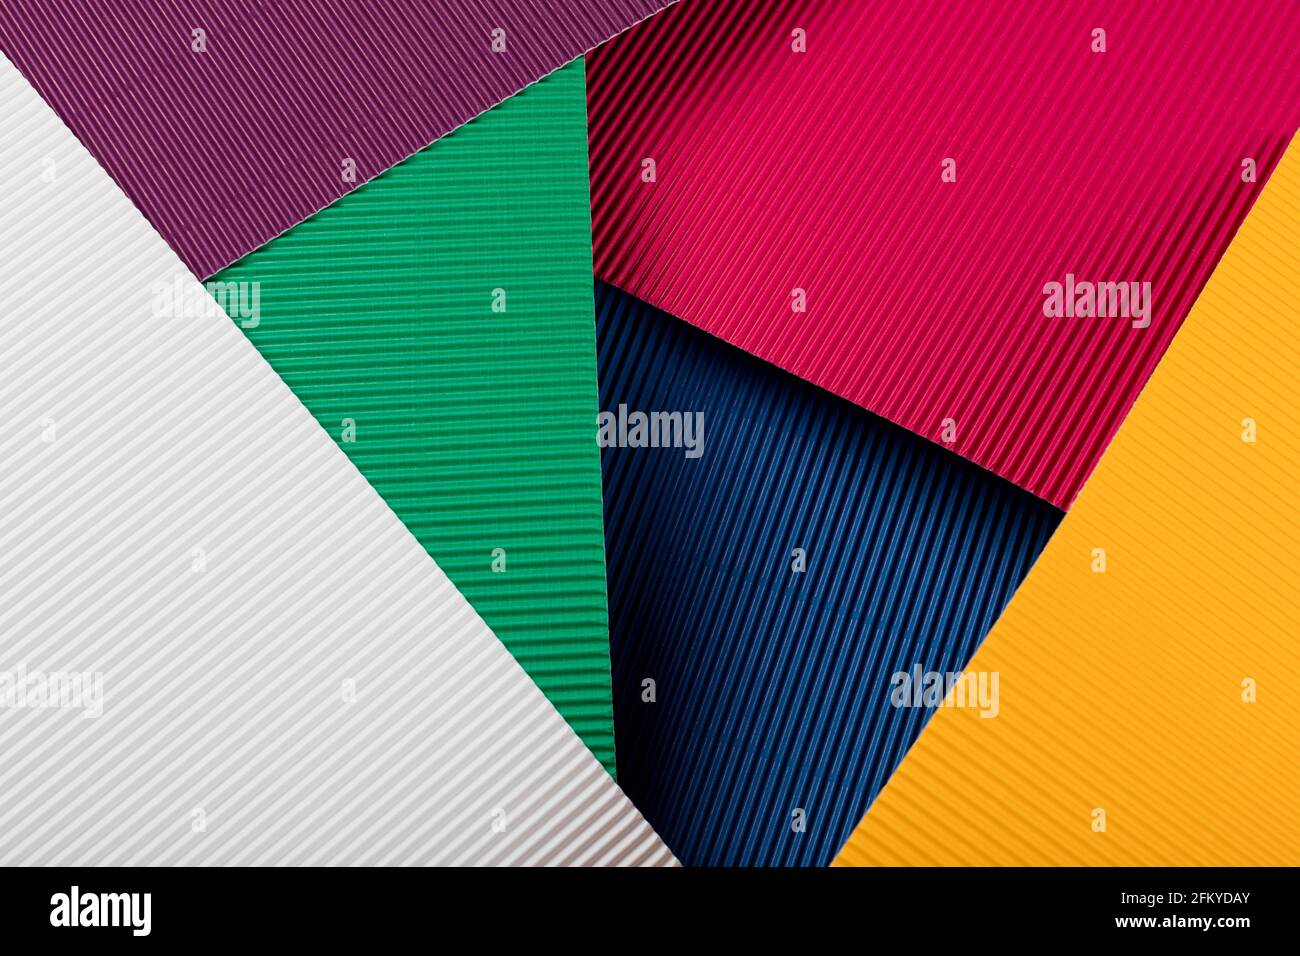 Colored corrugated paper texture. Geometric shapes and lines. Minimalist background. Flat lay. Copy space. Stock Photo